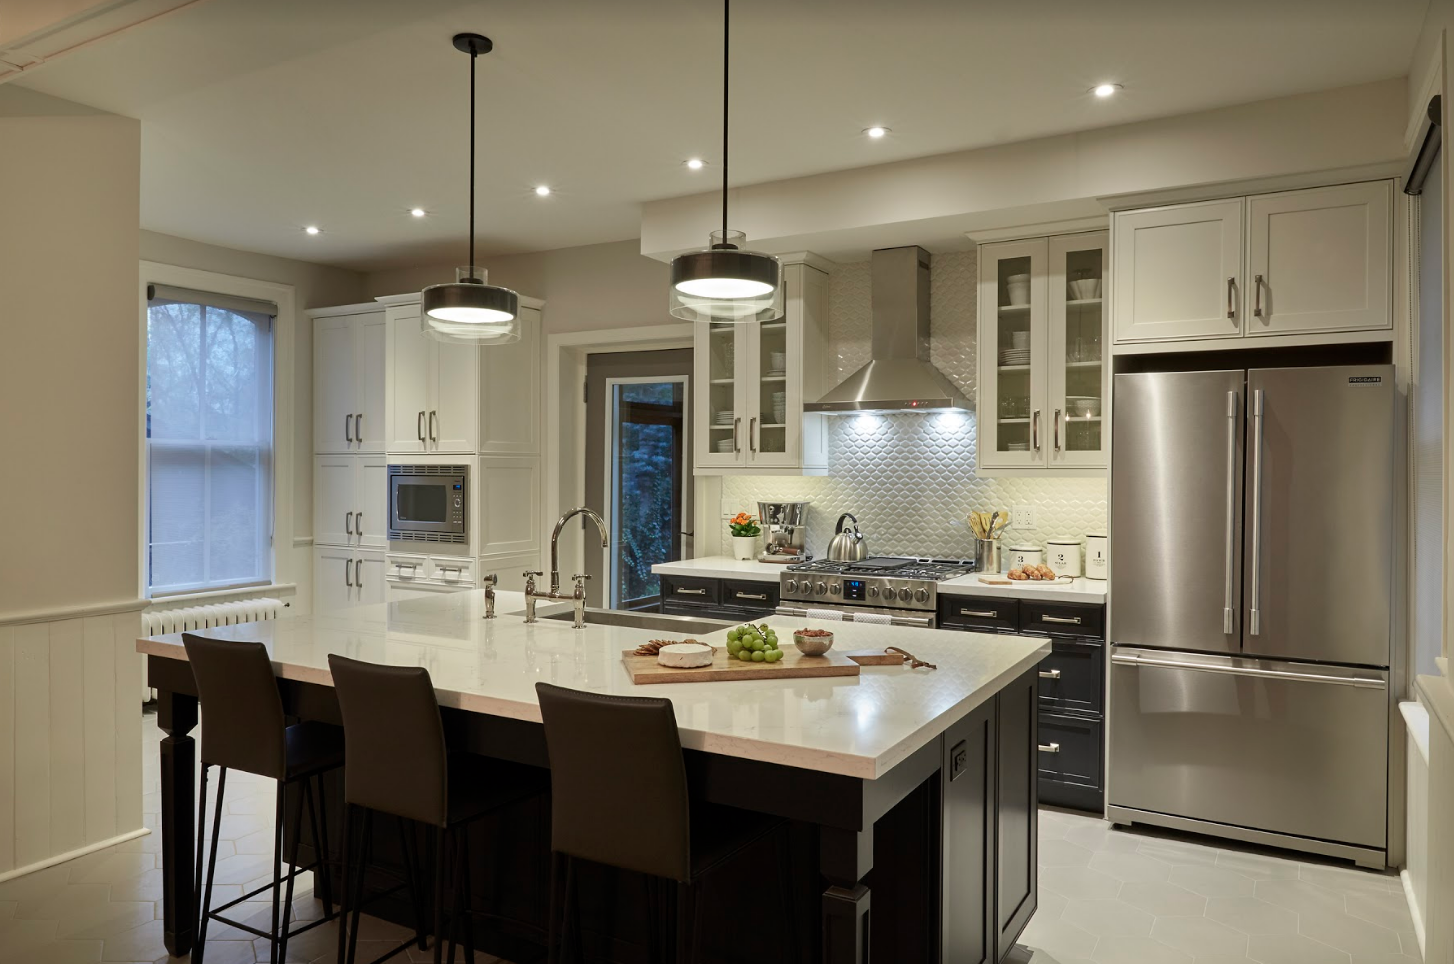 Kitchen with stainless steel appliances and large kitchen island